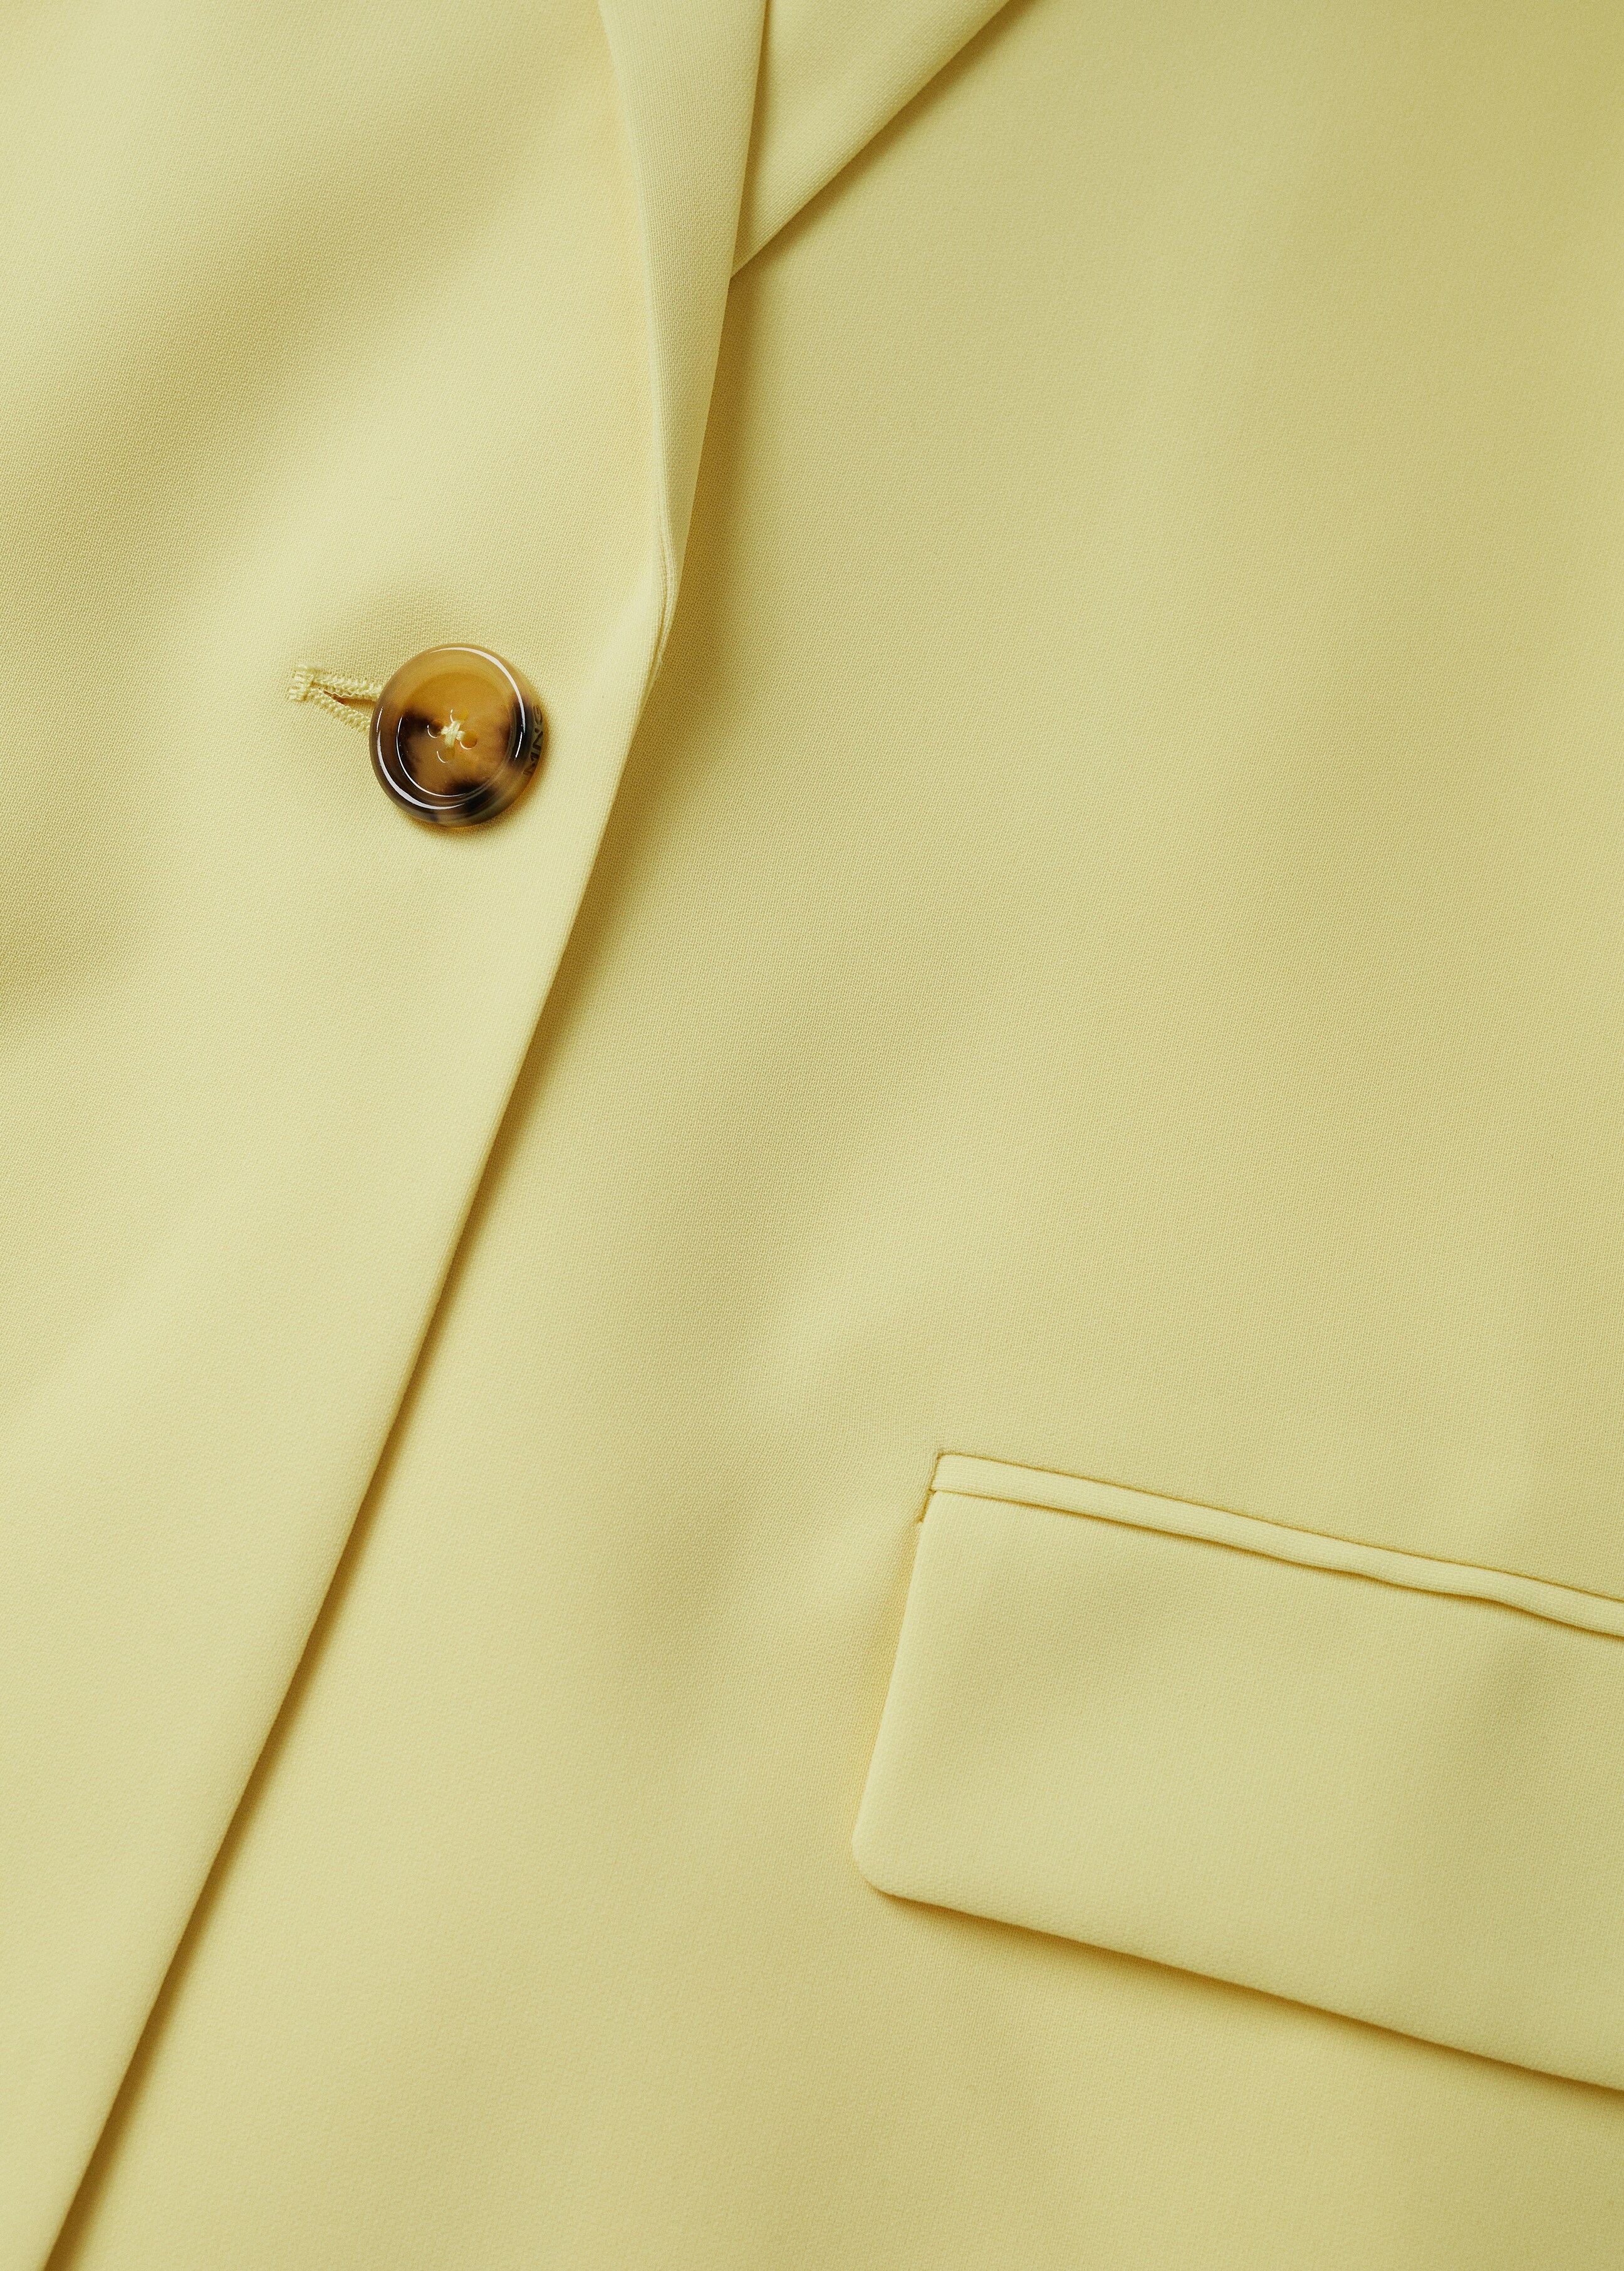 Oversized suit jacket - Details of the article 8